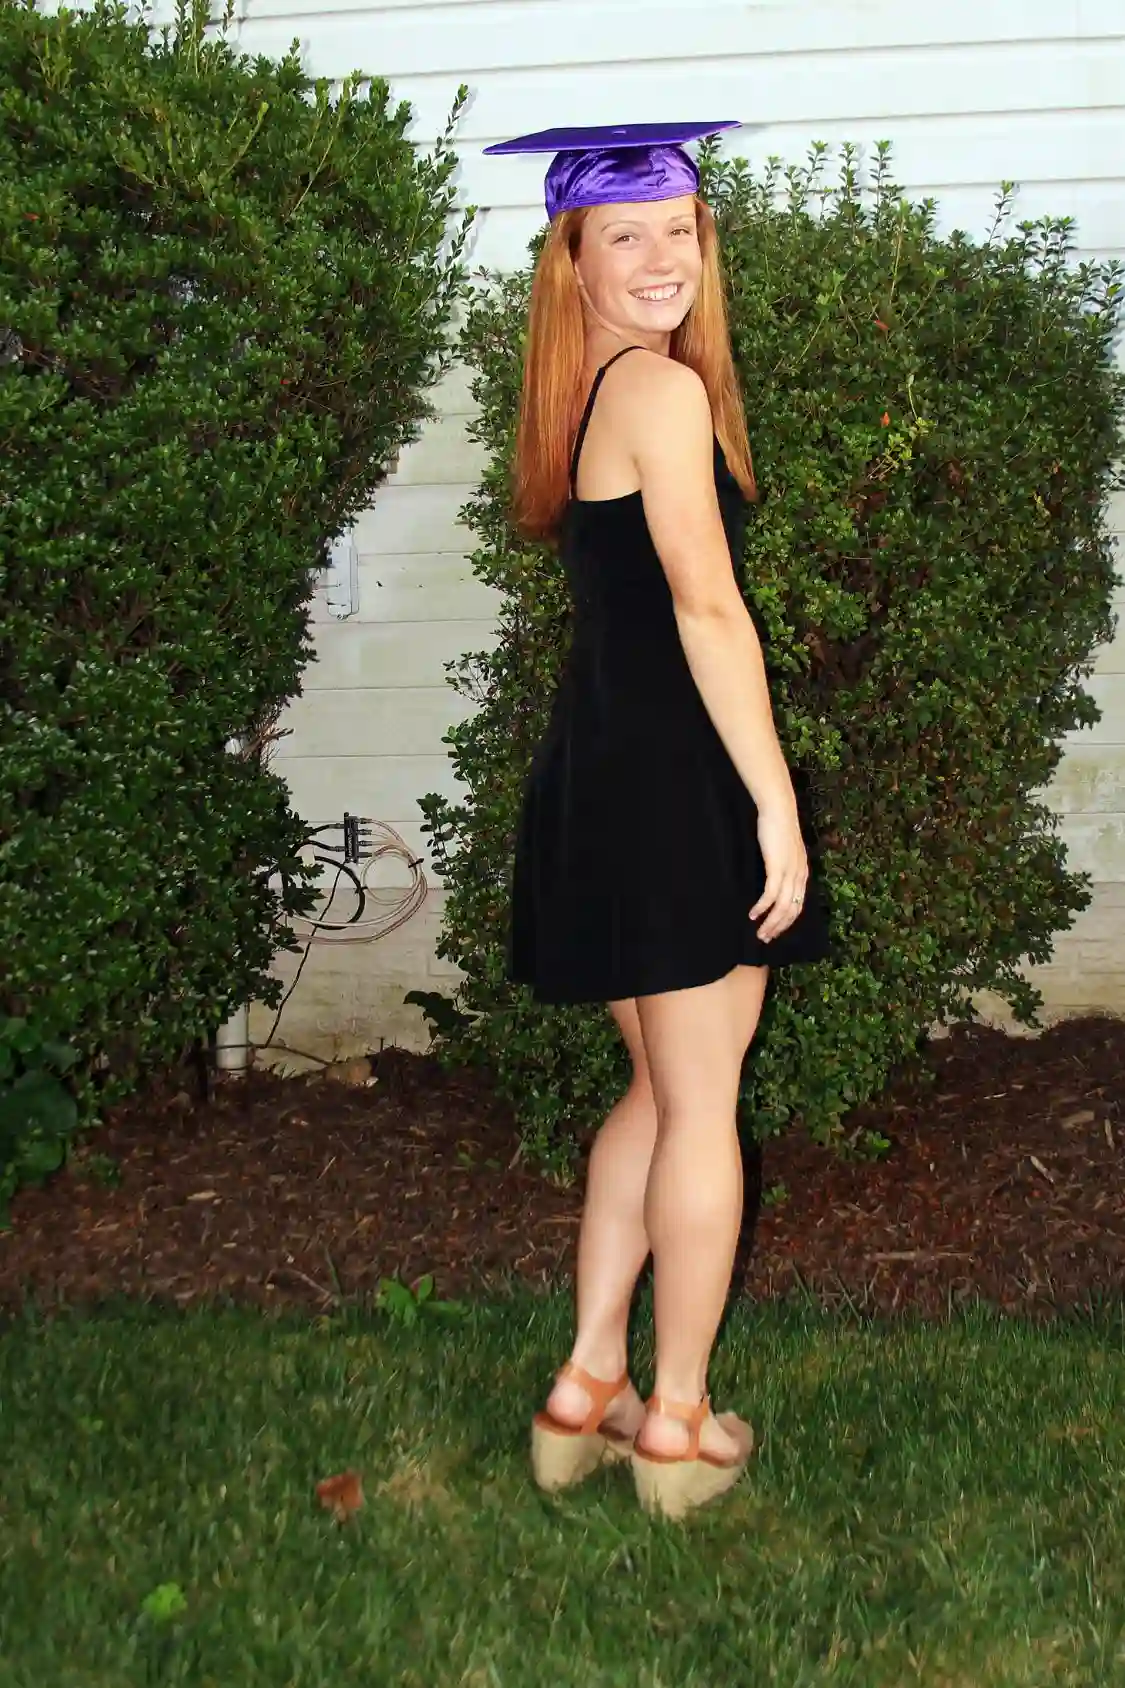 Young lady wearing a little black dress and graduation cap